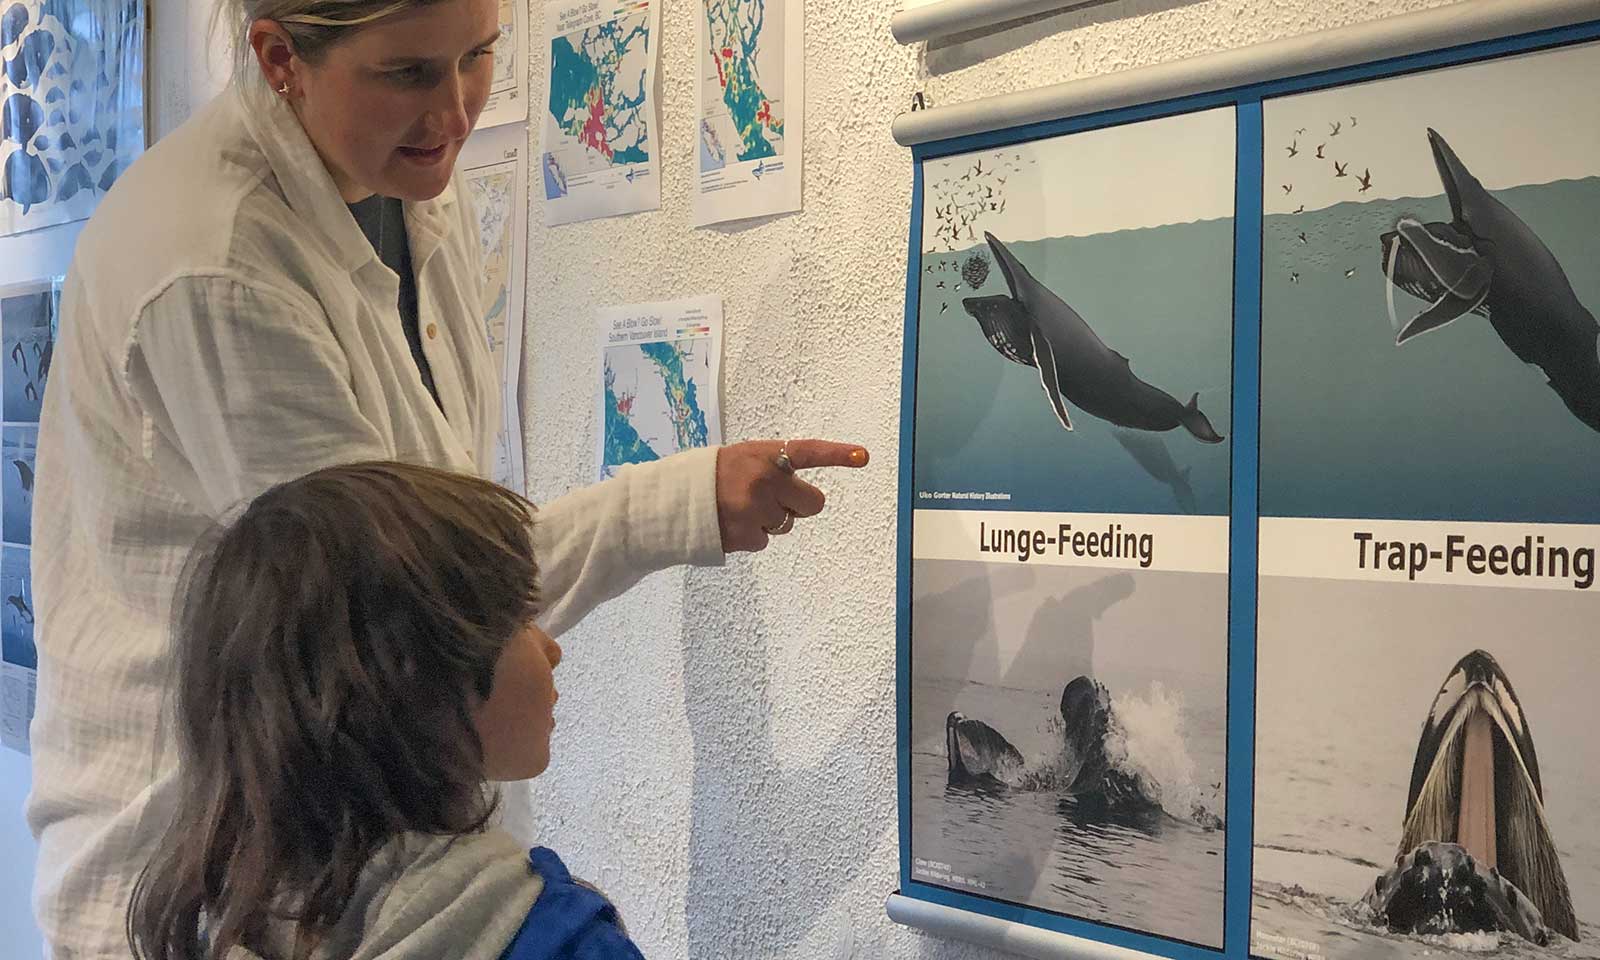 mers marine education research society educator showing whale images to child